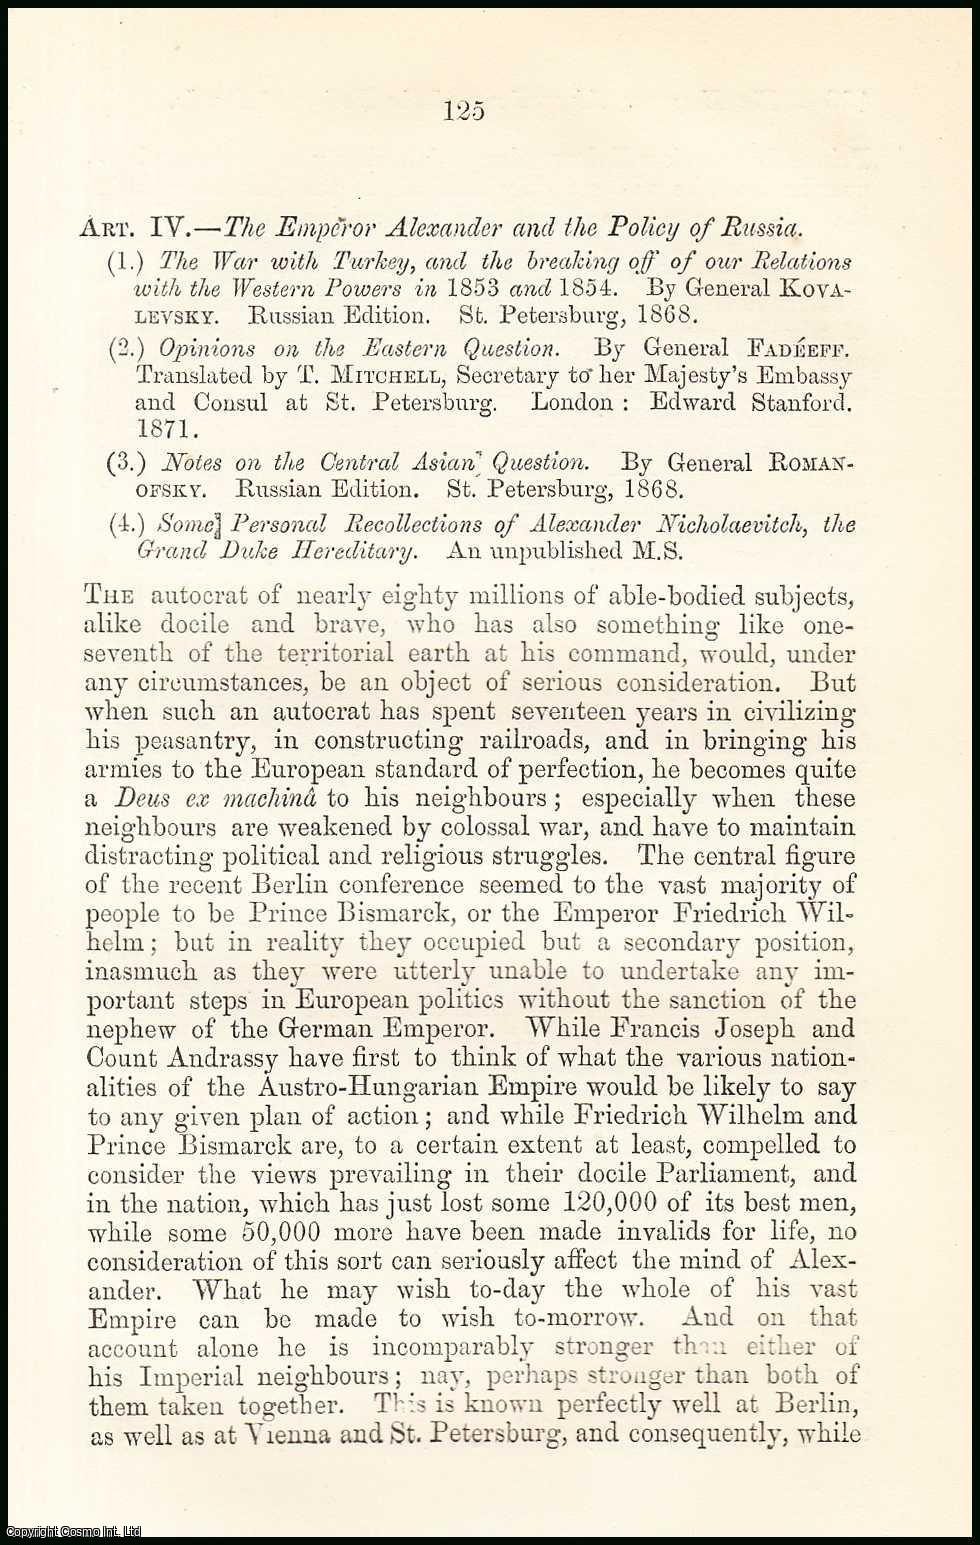 Author Unknown - The Emperor Alexander and the Policy of Russia. A rare original article from the British Quarterly Review, 1873.